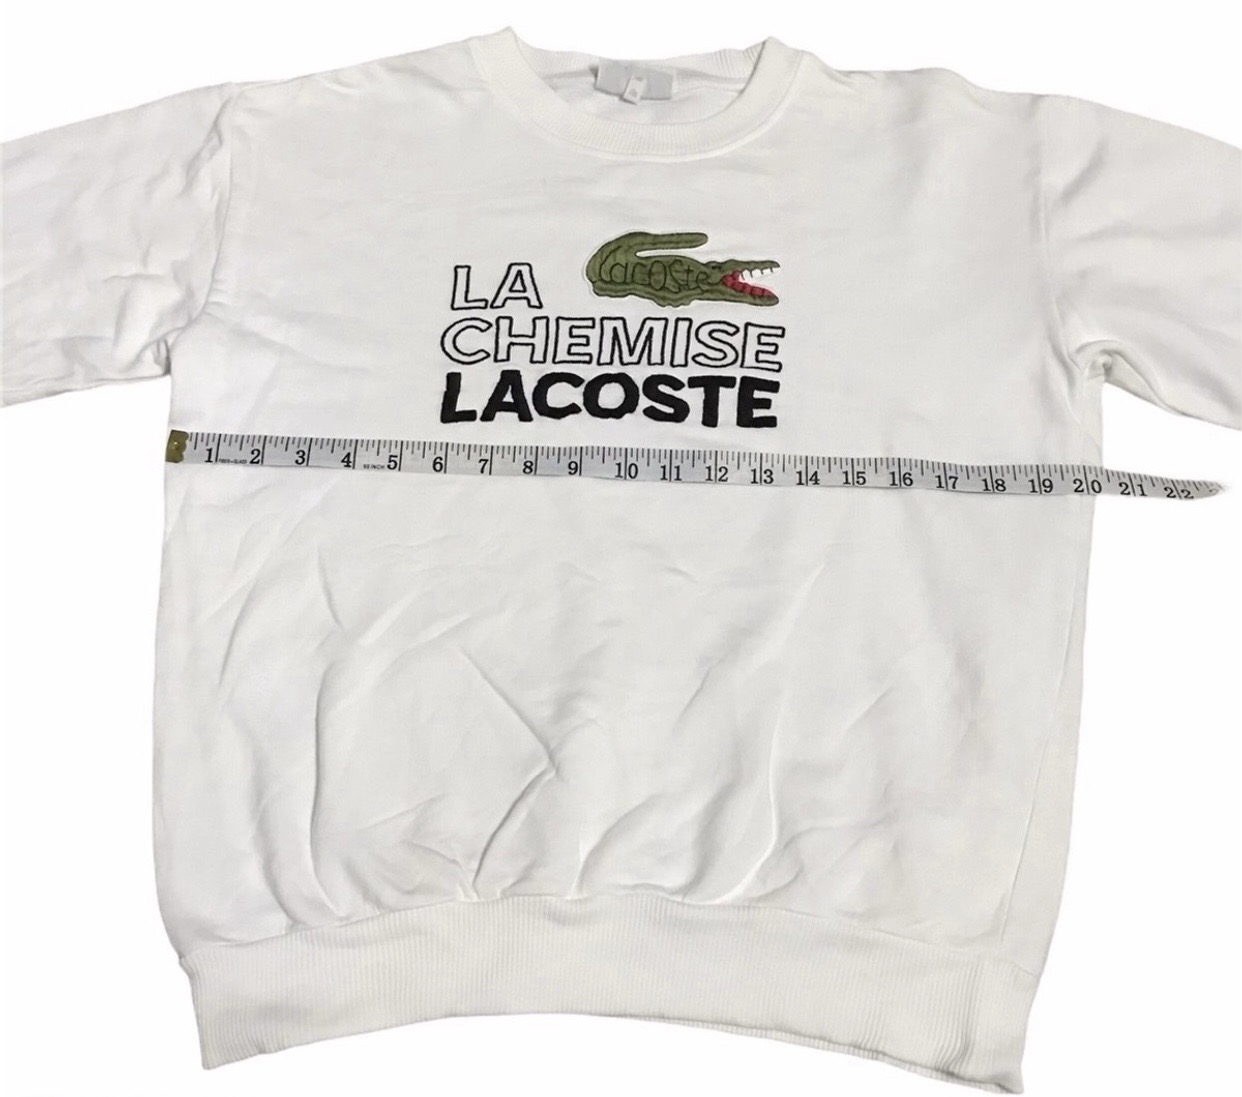 Lacoste Lacoste Towel Made In Japan Embroidery Logo